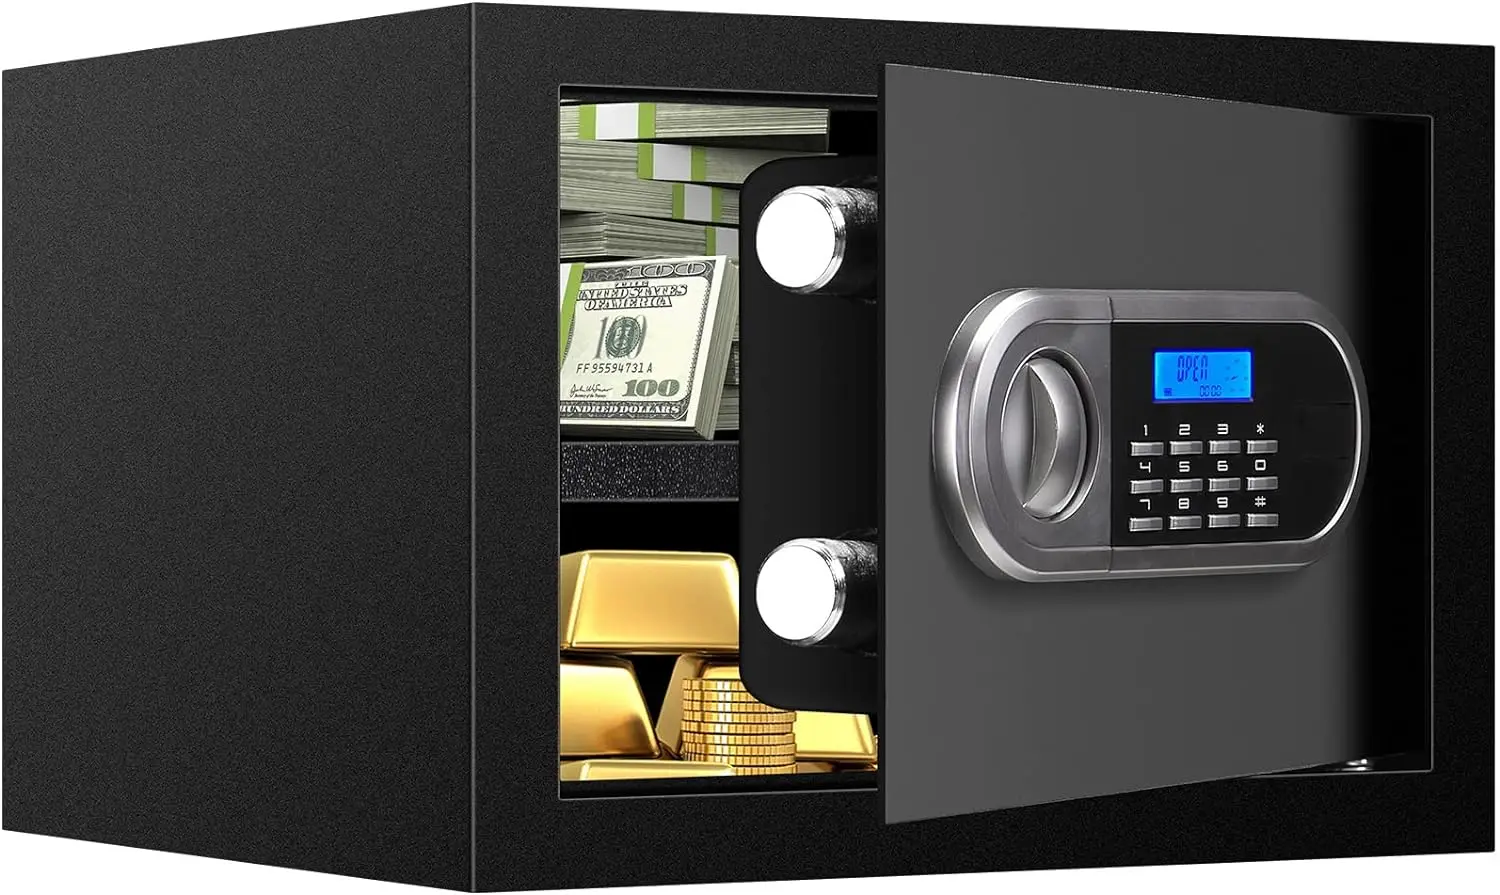 06-cubic-feet-small-home-safe-fireproof-waterproof-w-programmable-keypad-spare-keys-and-led-light-for-valuables-black